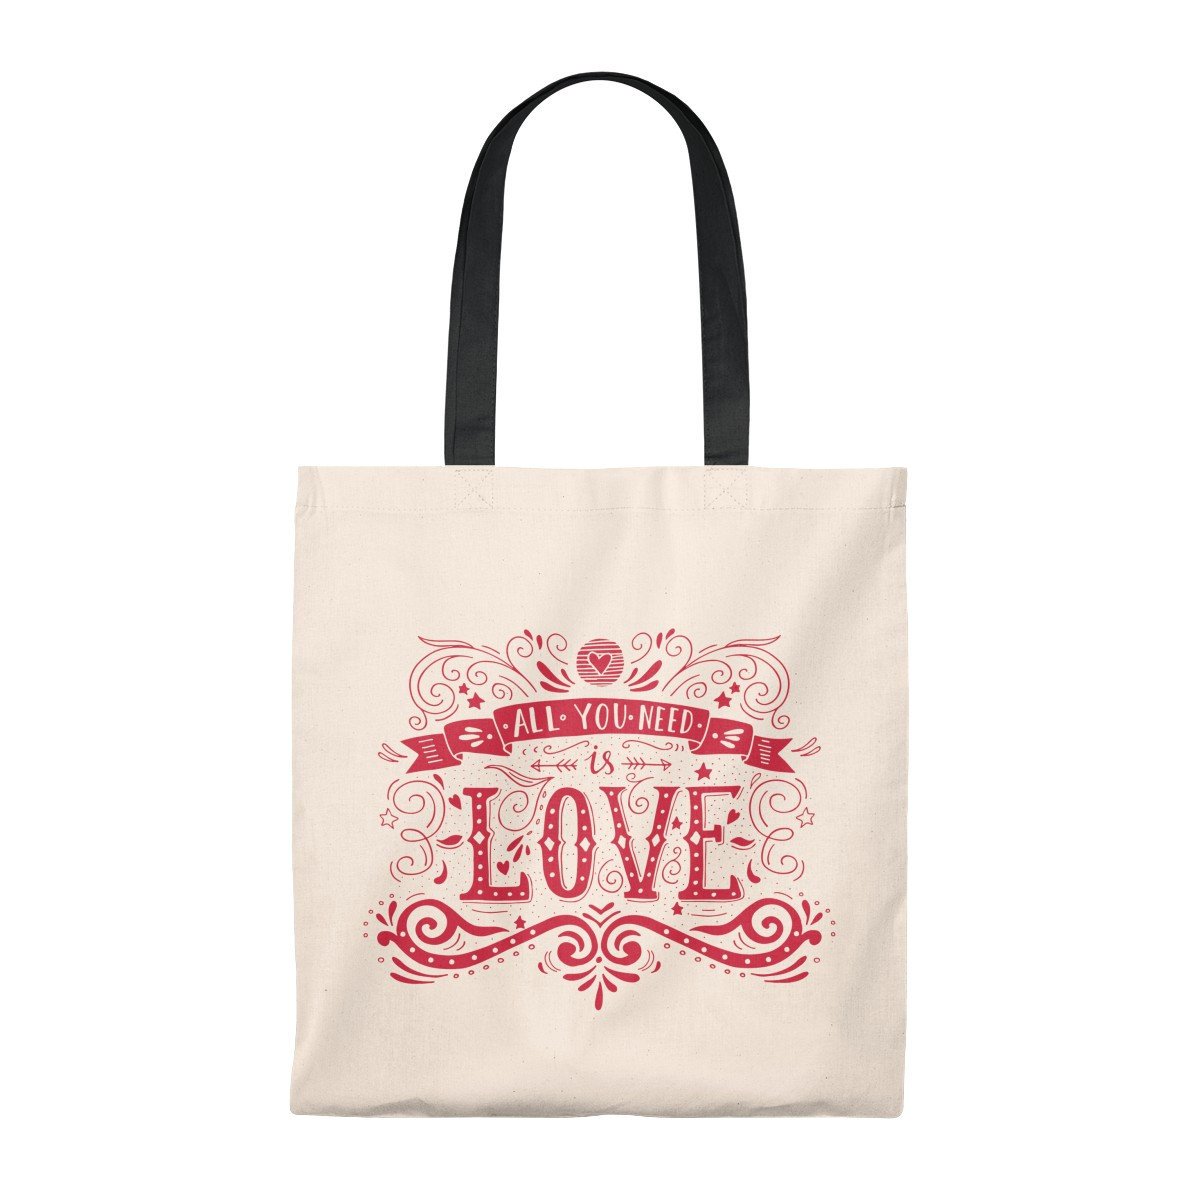 Excited to share the latest addition to my # shop: Beatles All You need Love Vintage Tote Bag etsy.me/2WfHear #bagsandpurses #white #engagement #valentinesday #pink #beachbag #retrototebag #totebags #pinktotebag